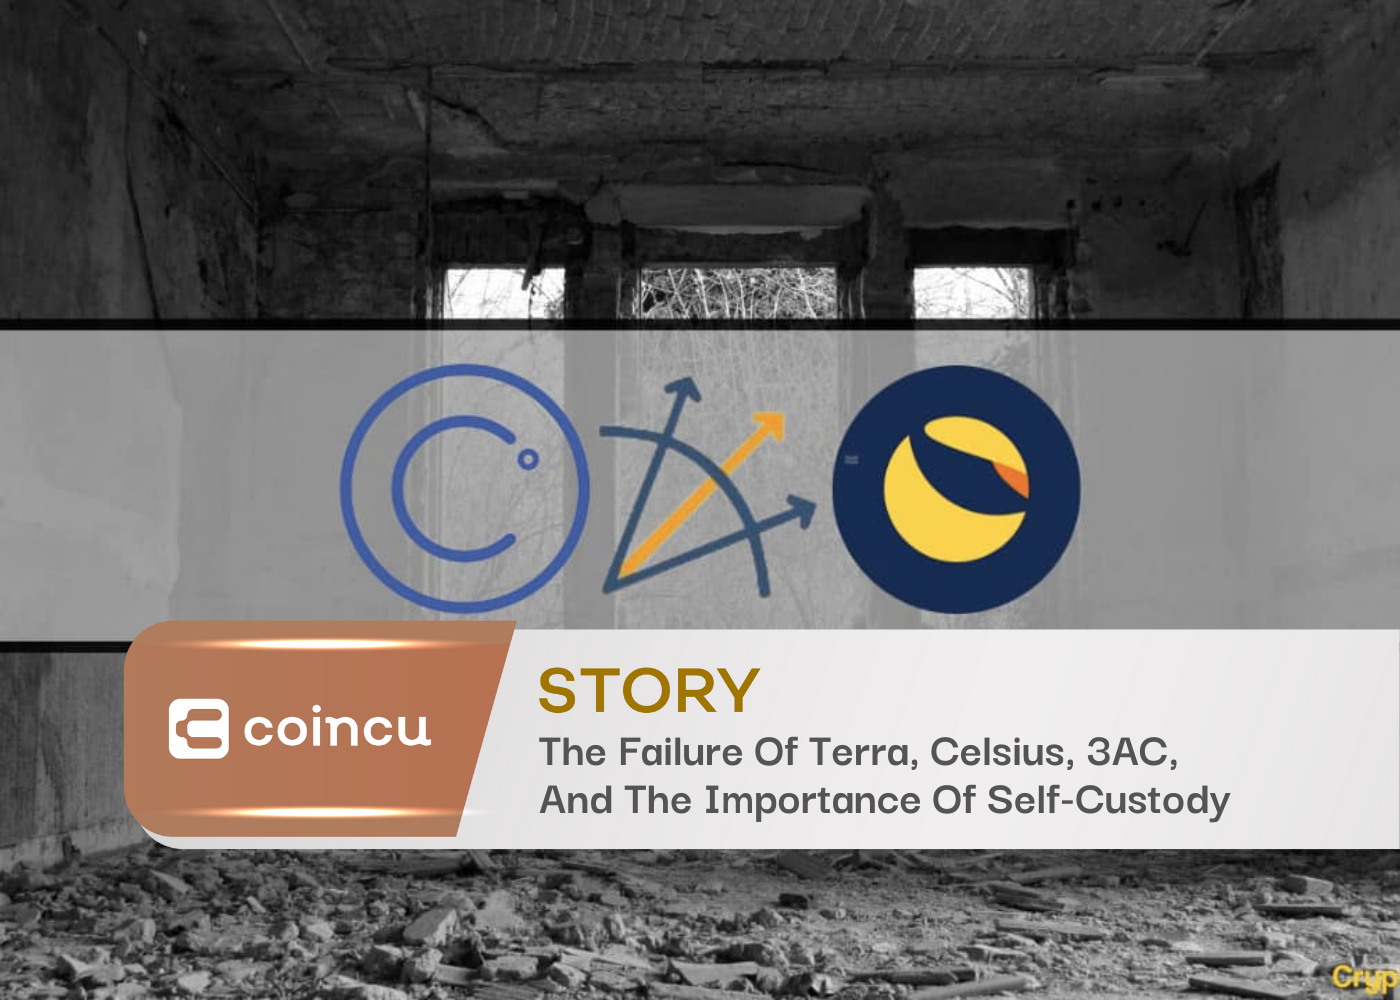 The Failure Of Terra, Celsius, 3AC, And The Importance Of Self-Custody